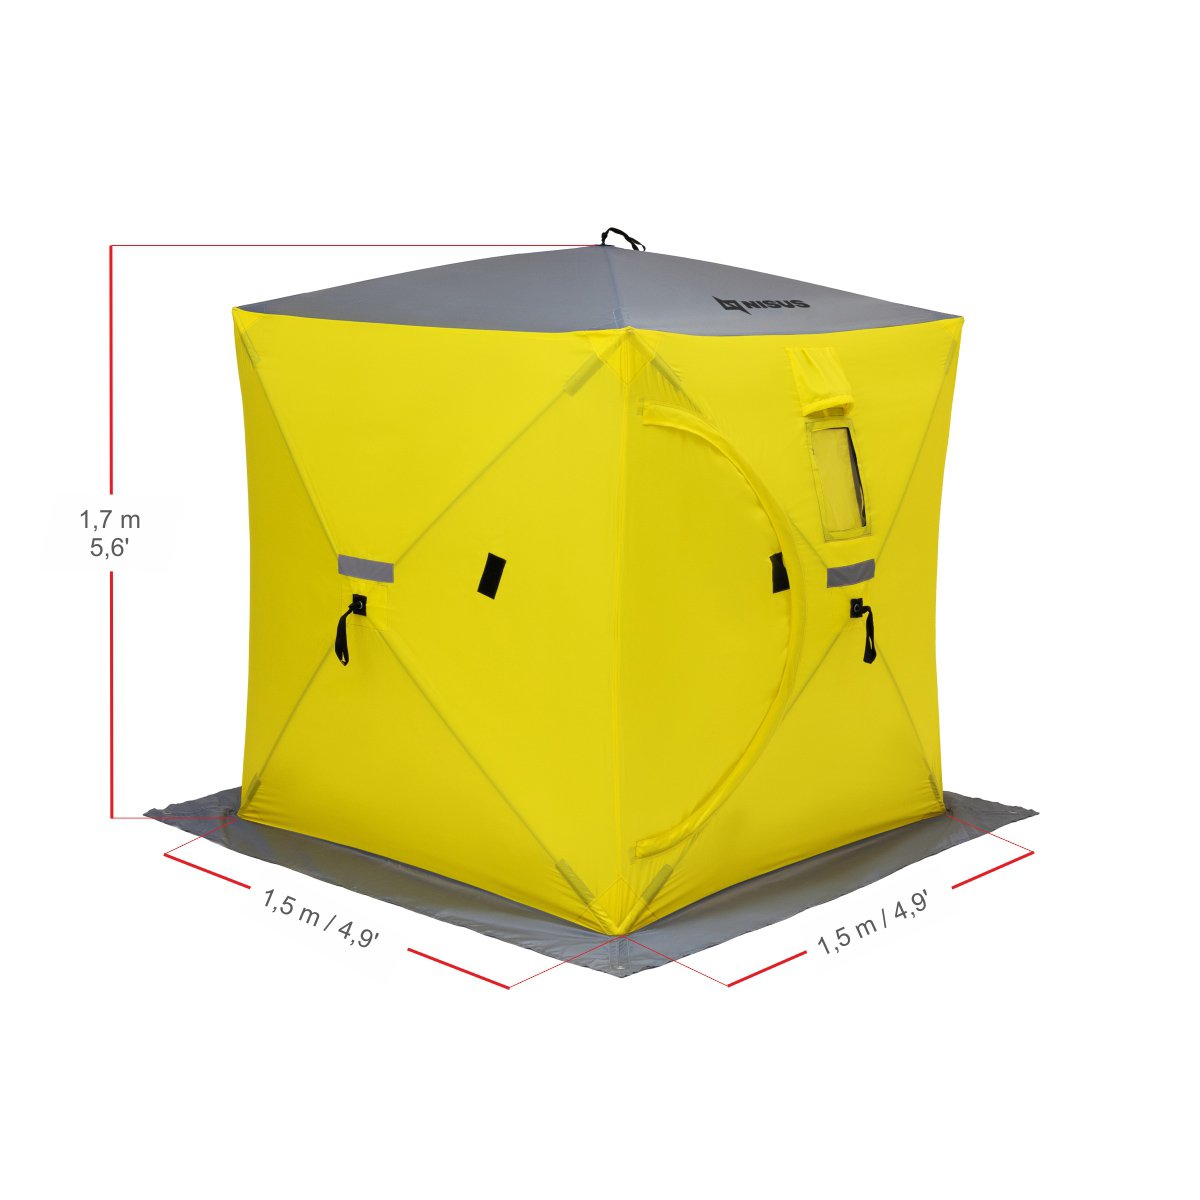 Cube Portable Pop-Up Ice Fishing Shelter for 2 Persons is 5.6 feet high, 4,9 feet long and 4.9 feet wide